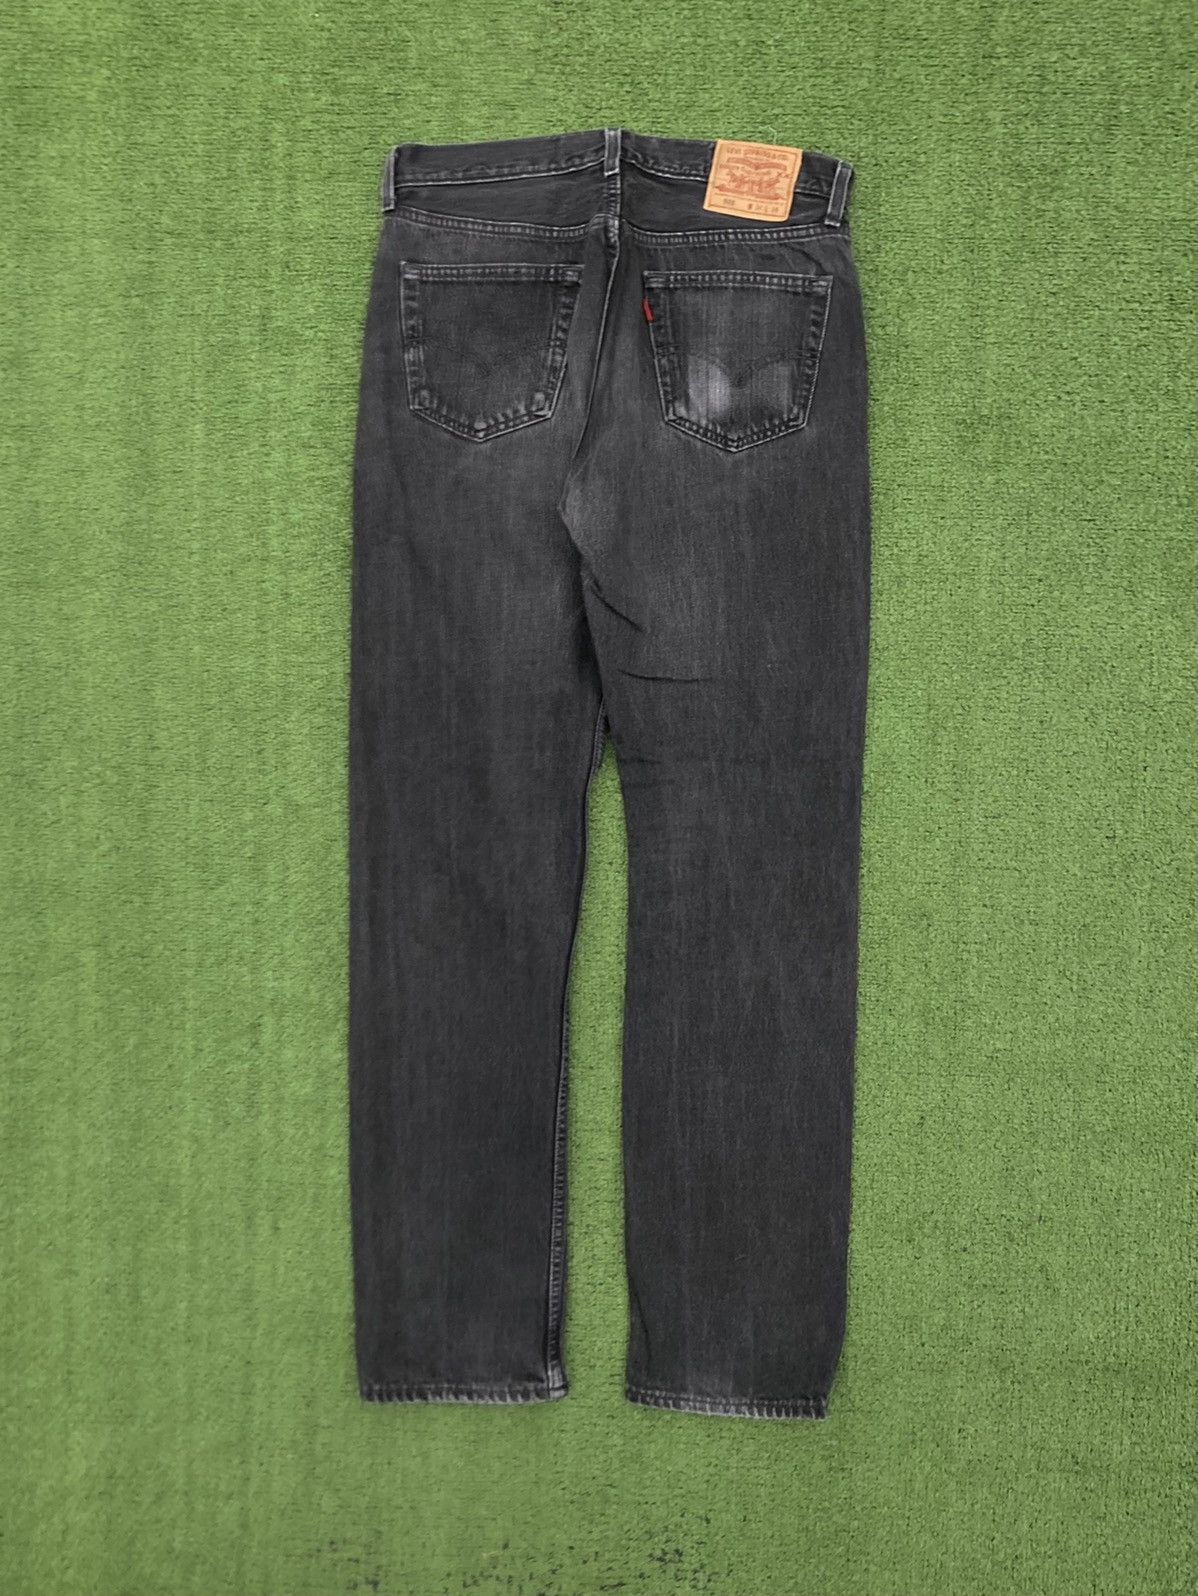 Vintage Vintage Rare Washed Black Levi’s 501 Made in USA 90s Size US 34 / EU 50 - 1 Preview